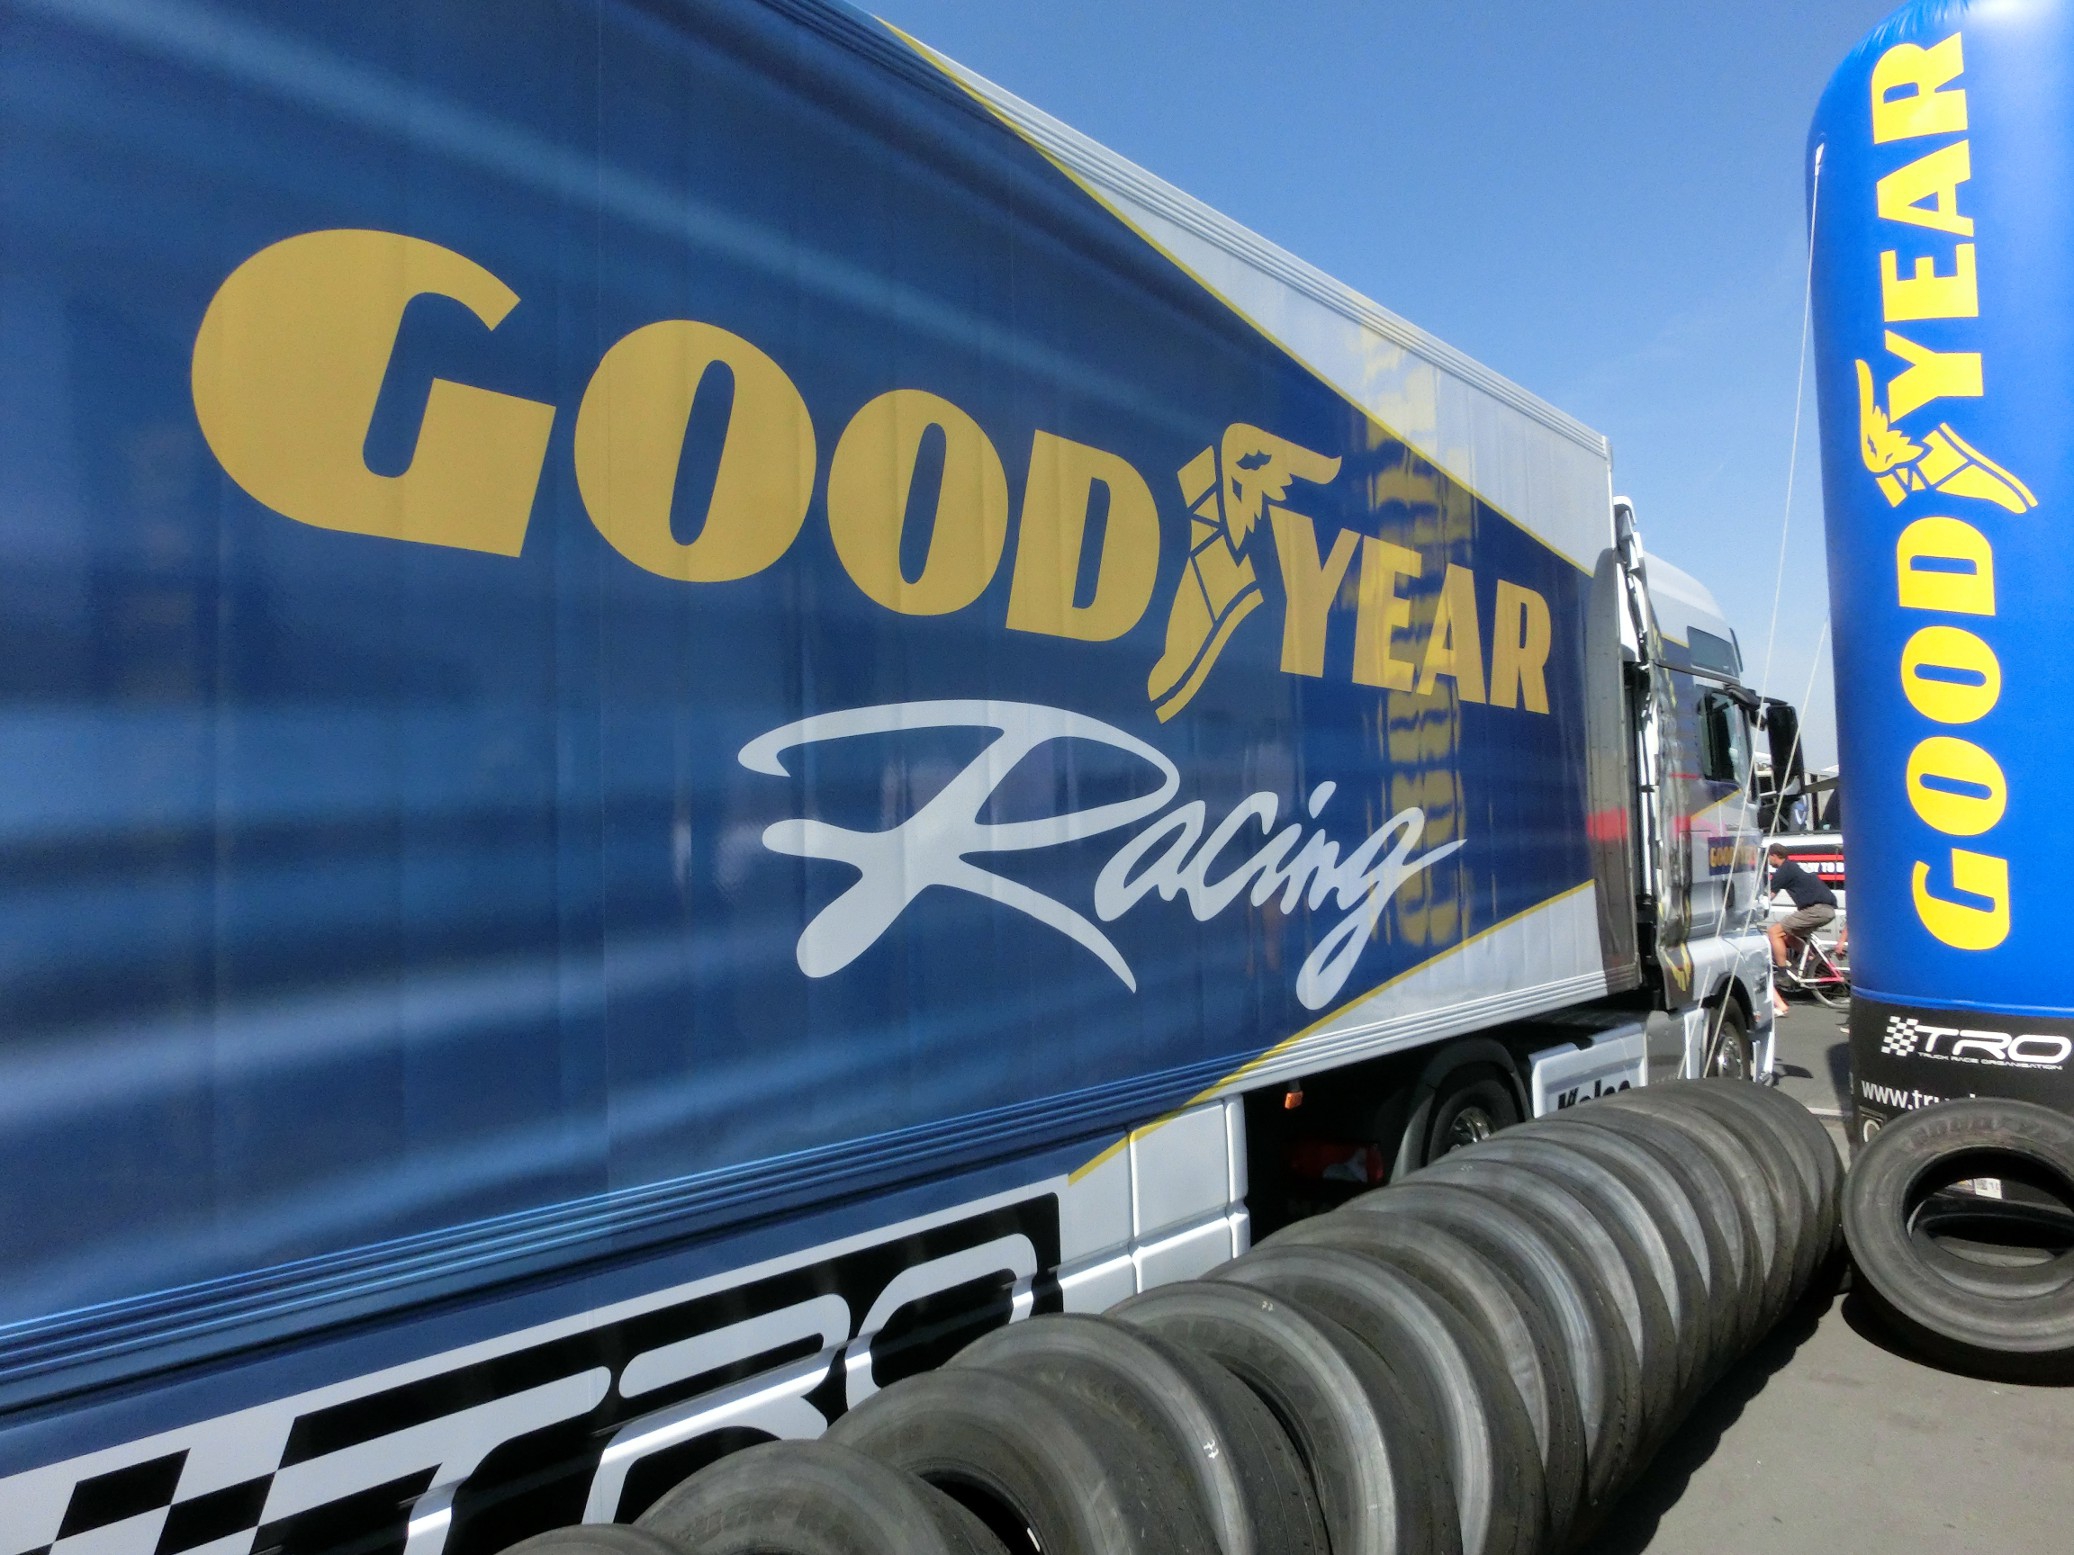 British Truck Racing partners with Goodyear in 3-year sponsorship deal